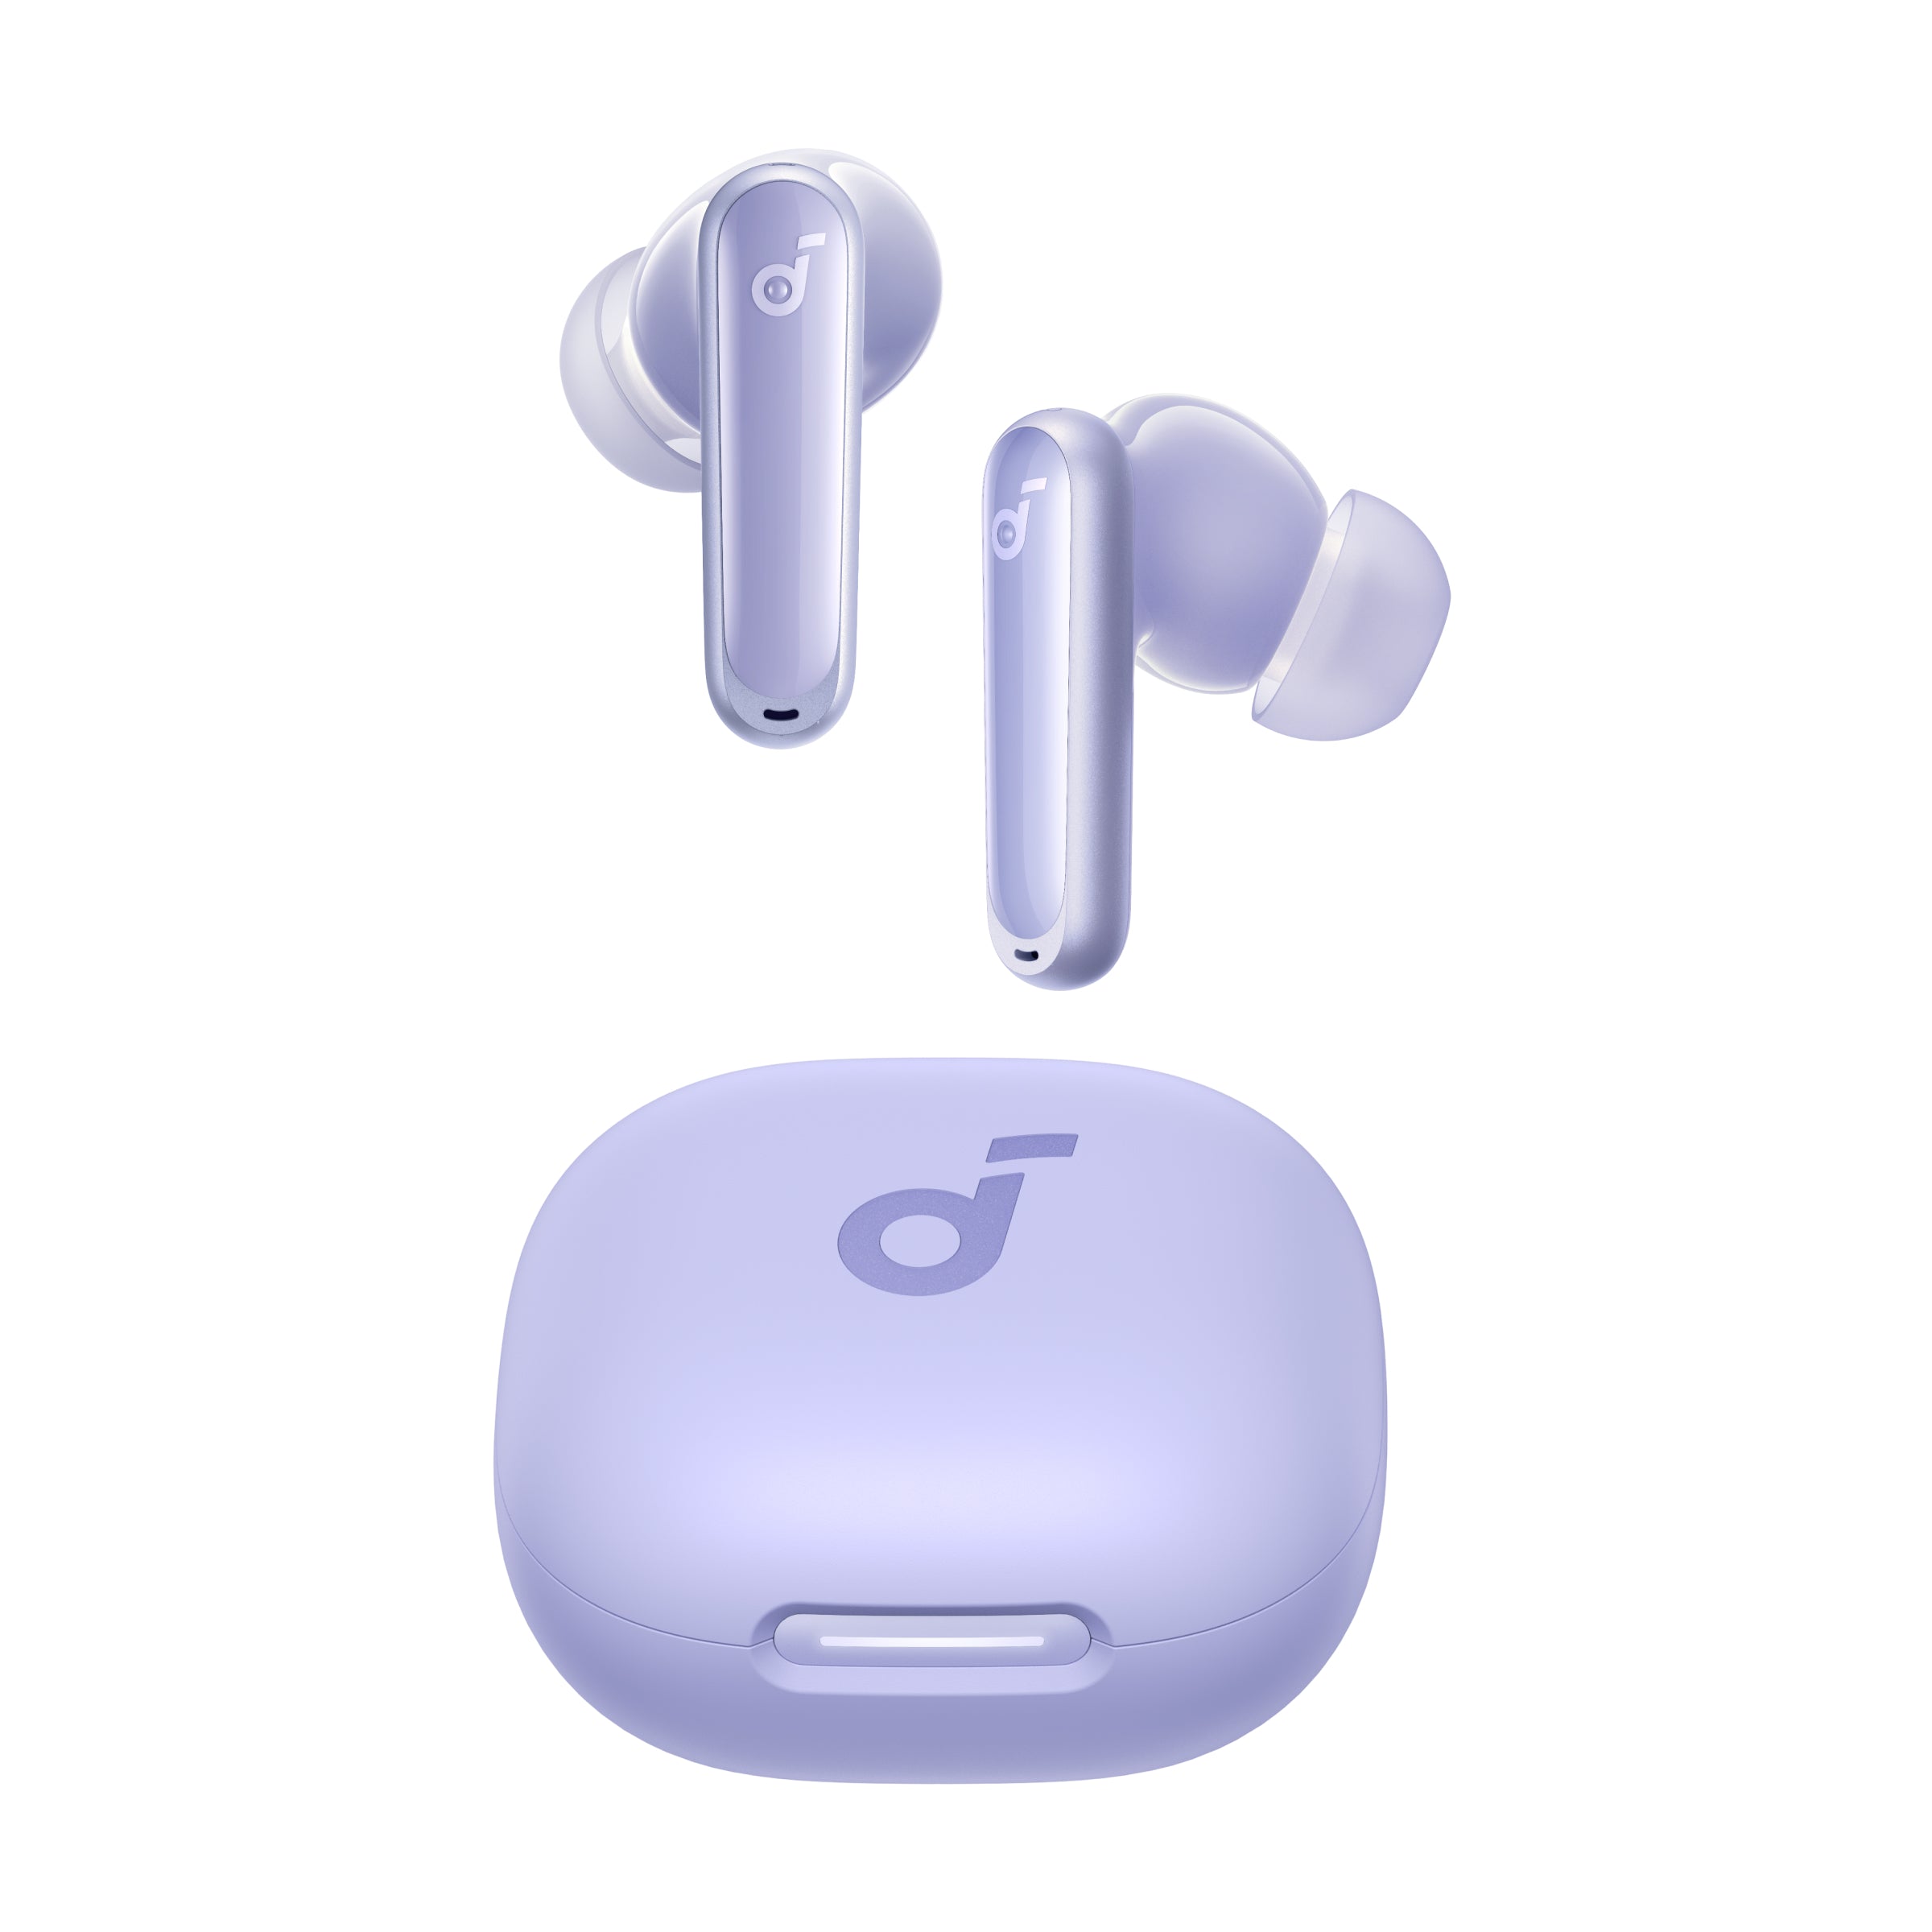 Save 50% on These Soundcore P20 Wireless Earbuds and Pick Your Color - CNET